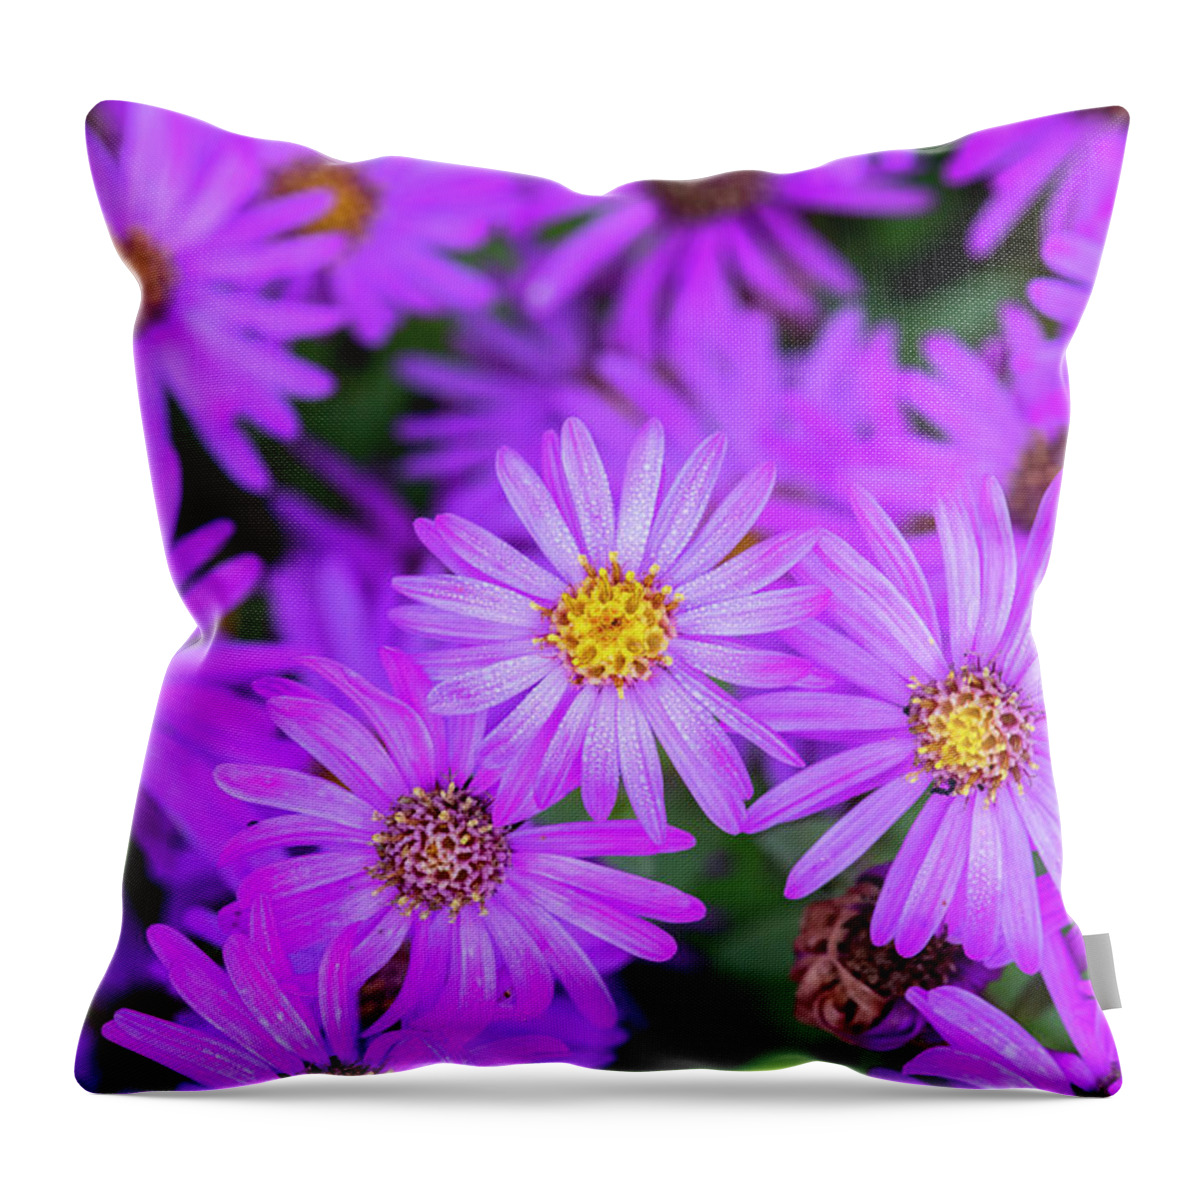 Aster Throw Pillow featuring the photograph Aster Amellus Brilliant Flowers by Tim Gainey